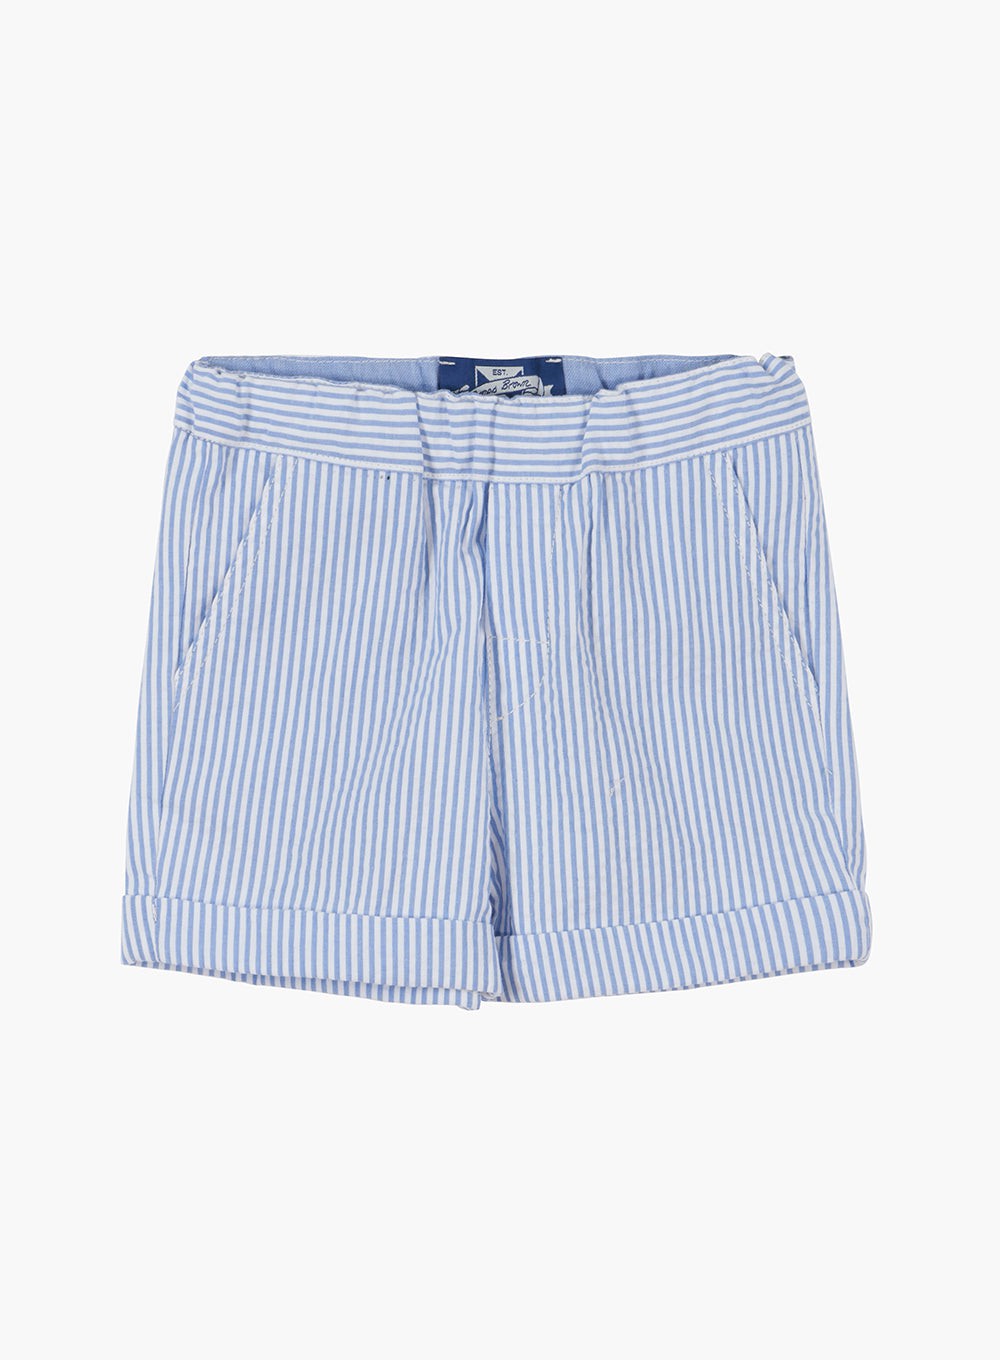 Thomas Brown Baby Boys Charlie Pull Up Shorts Blue Stripe | Trotters London